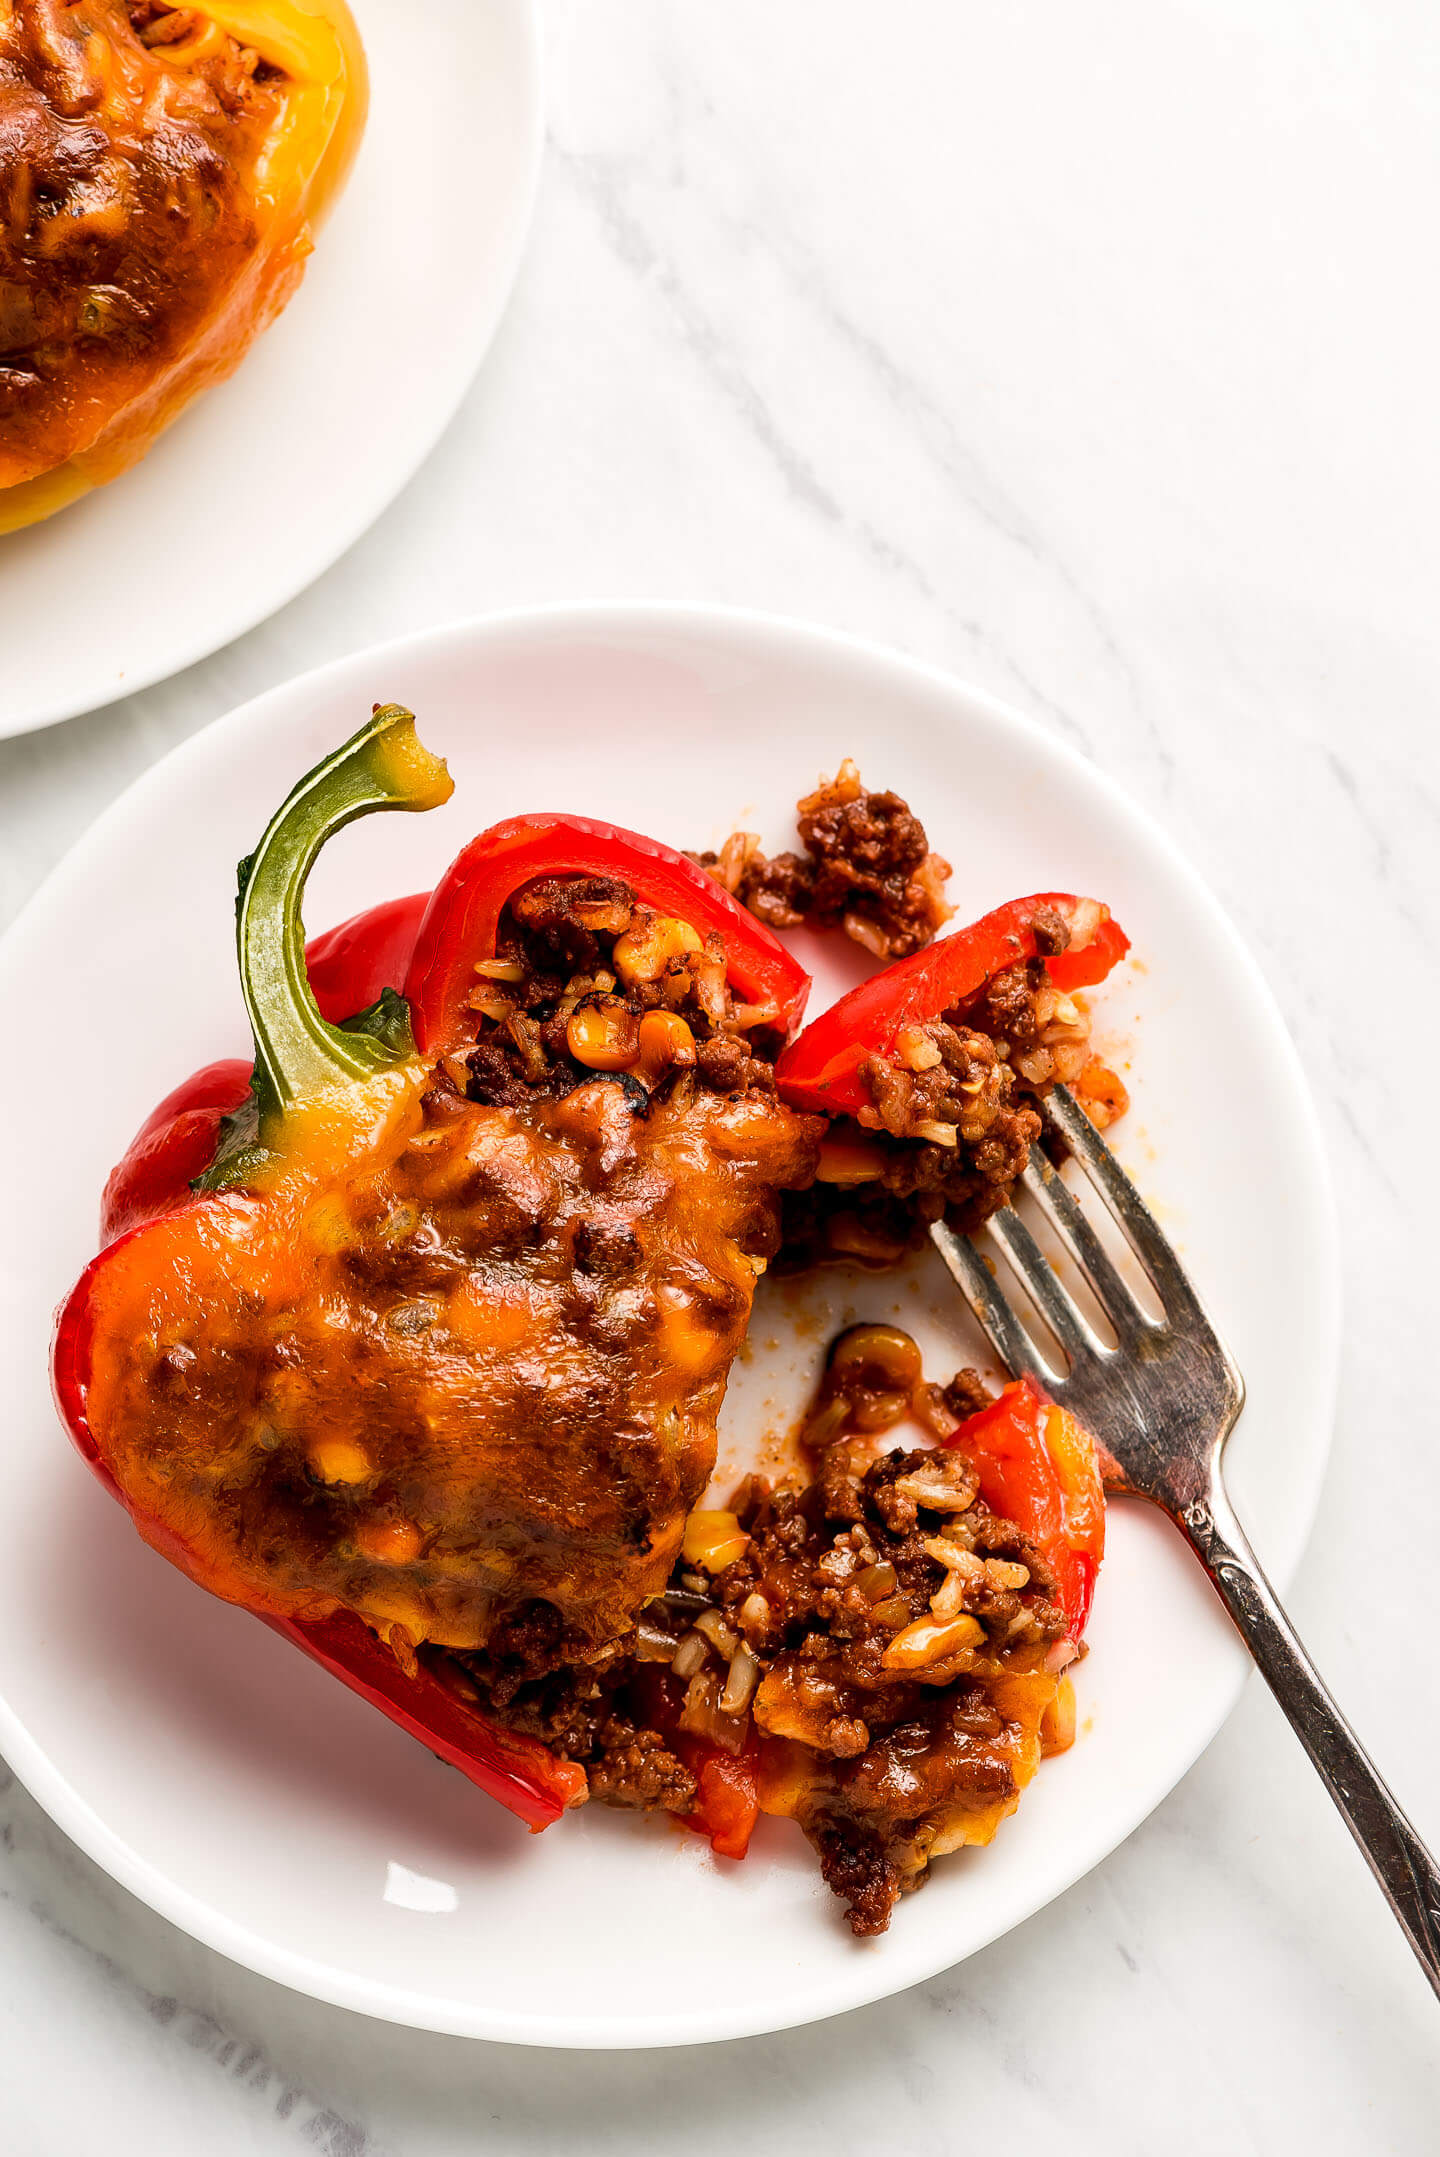 A stuffed red bell pepper on a plate with a few pieces cut off with a fork on the side.